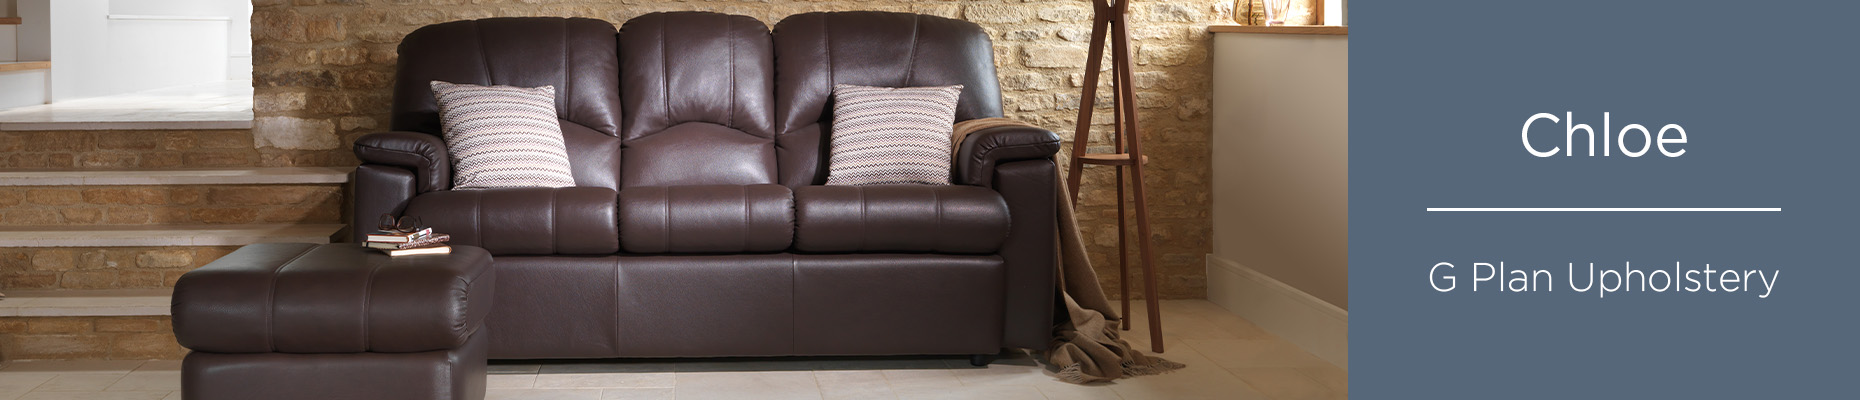 Chloe Leather sofa collection from G Plan at Forrest Furnishing